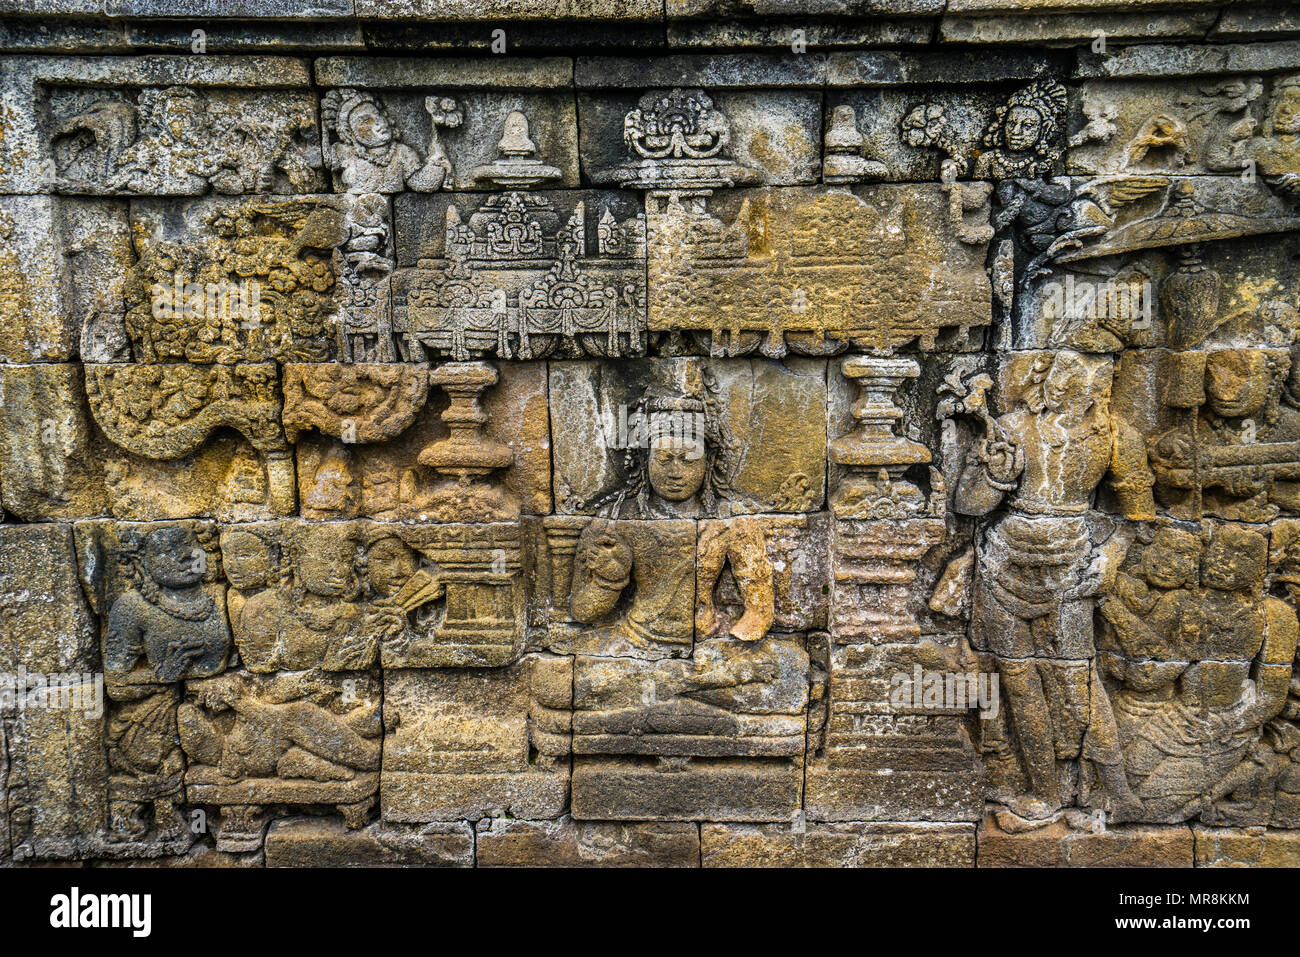 Borobudur relief gallery hi-res stock Alamy - photography images and